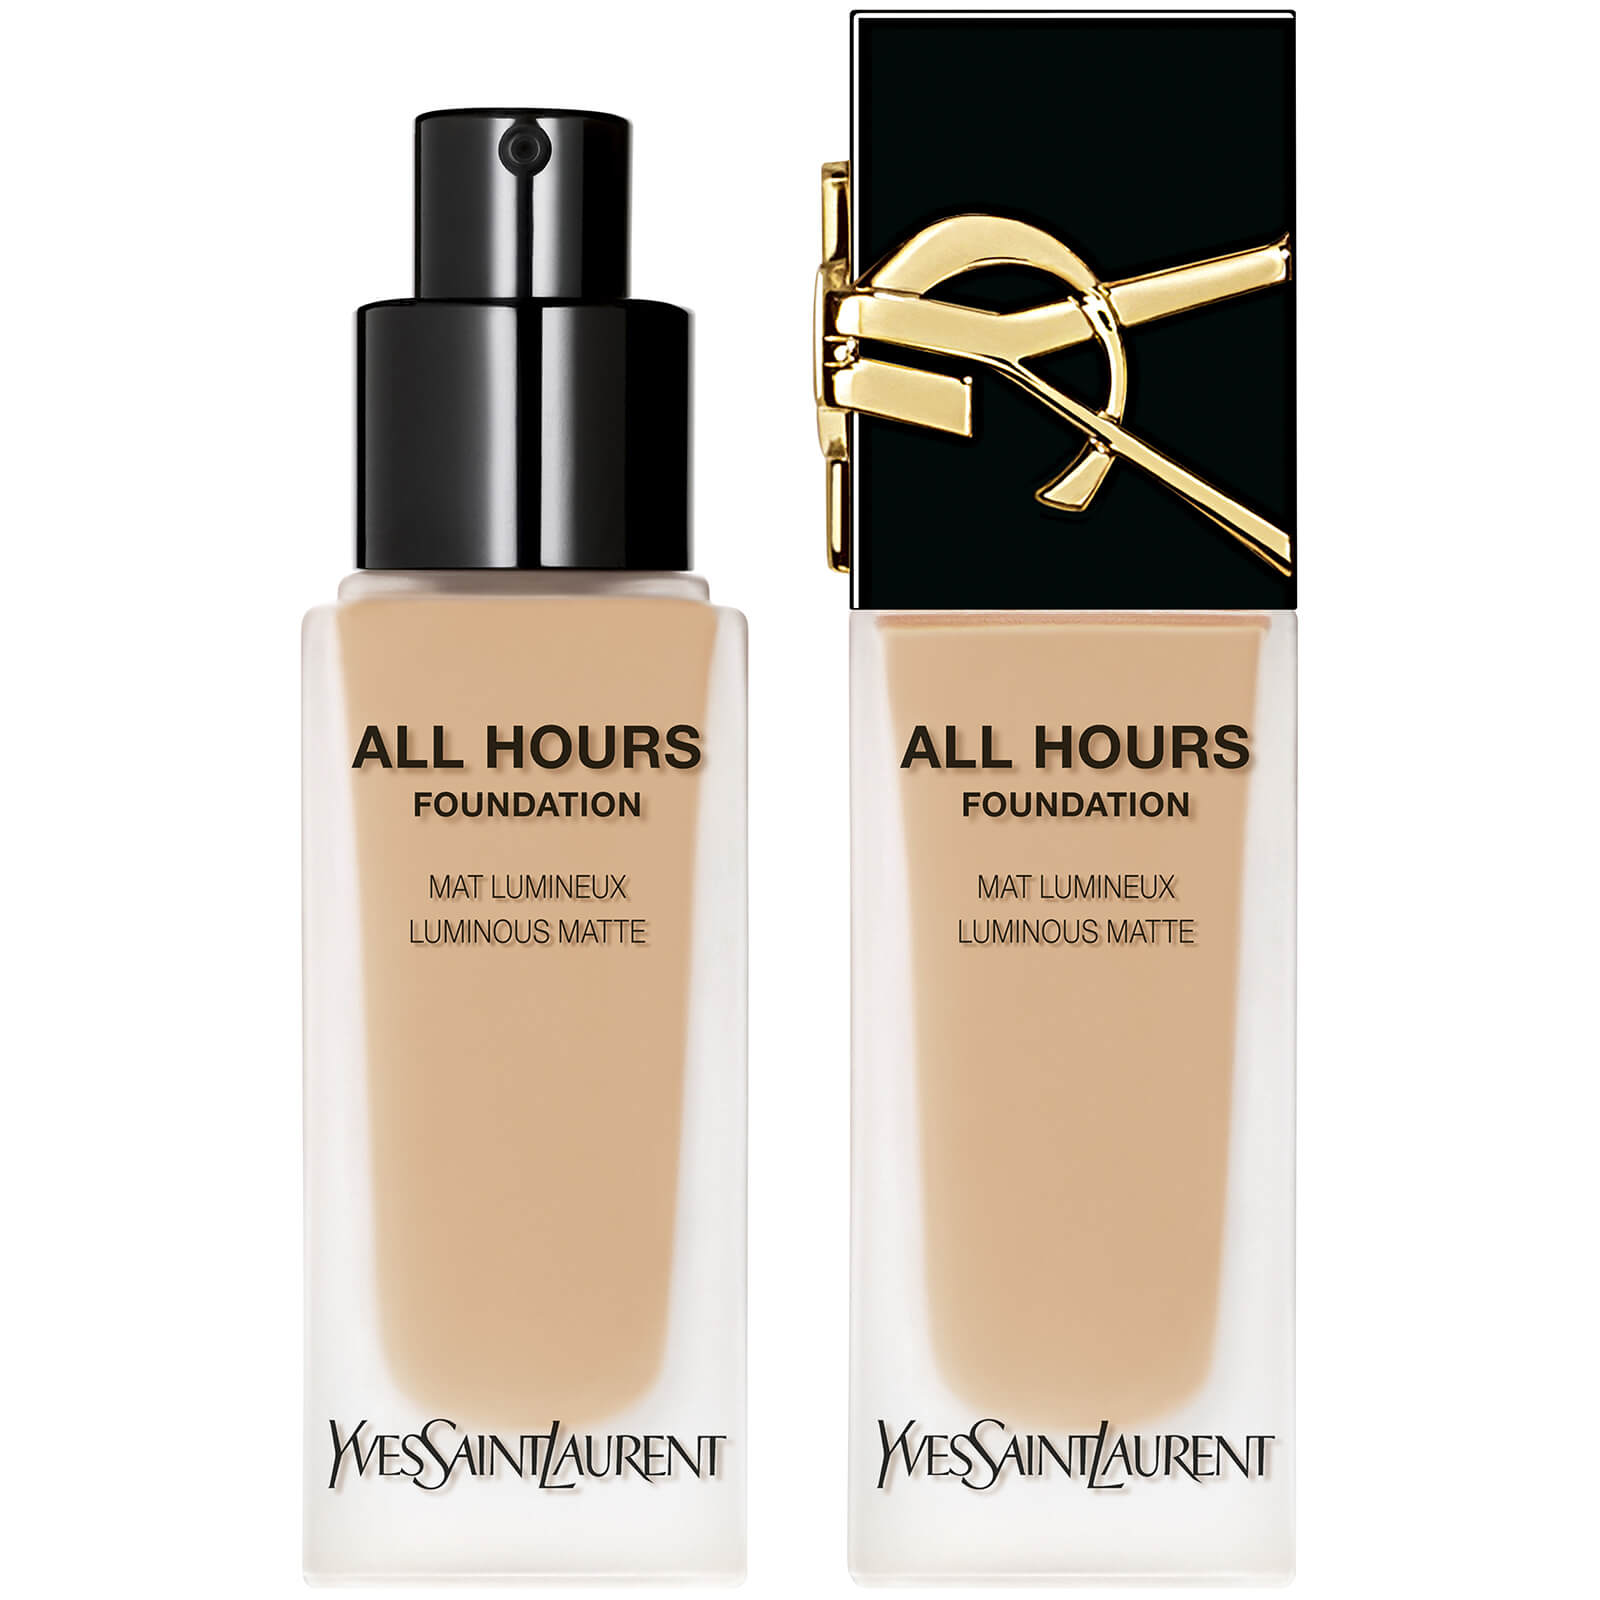 Yves Saint Laurent All Hours Luminous Matte Foundation with SPF 39 25ml (Various Shades) - LN6